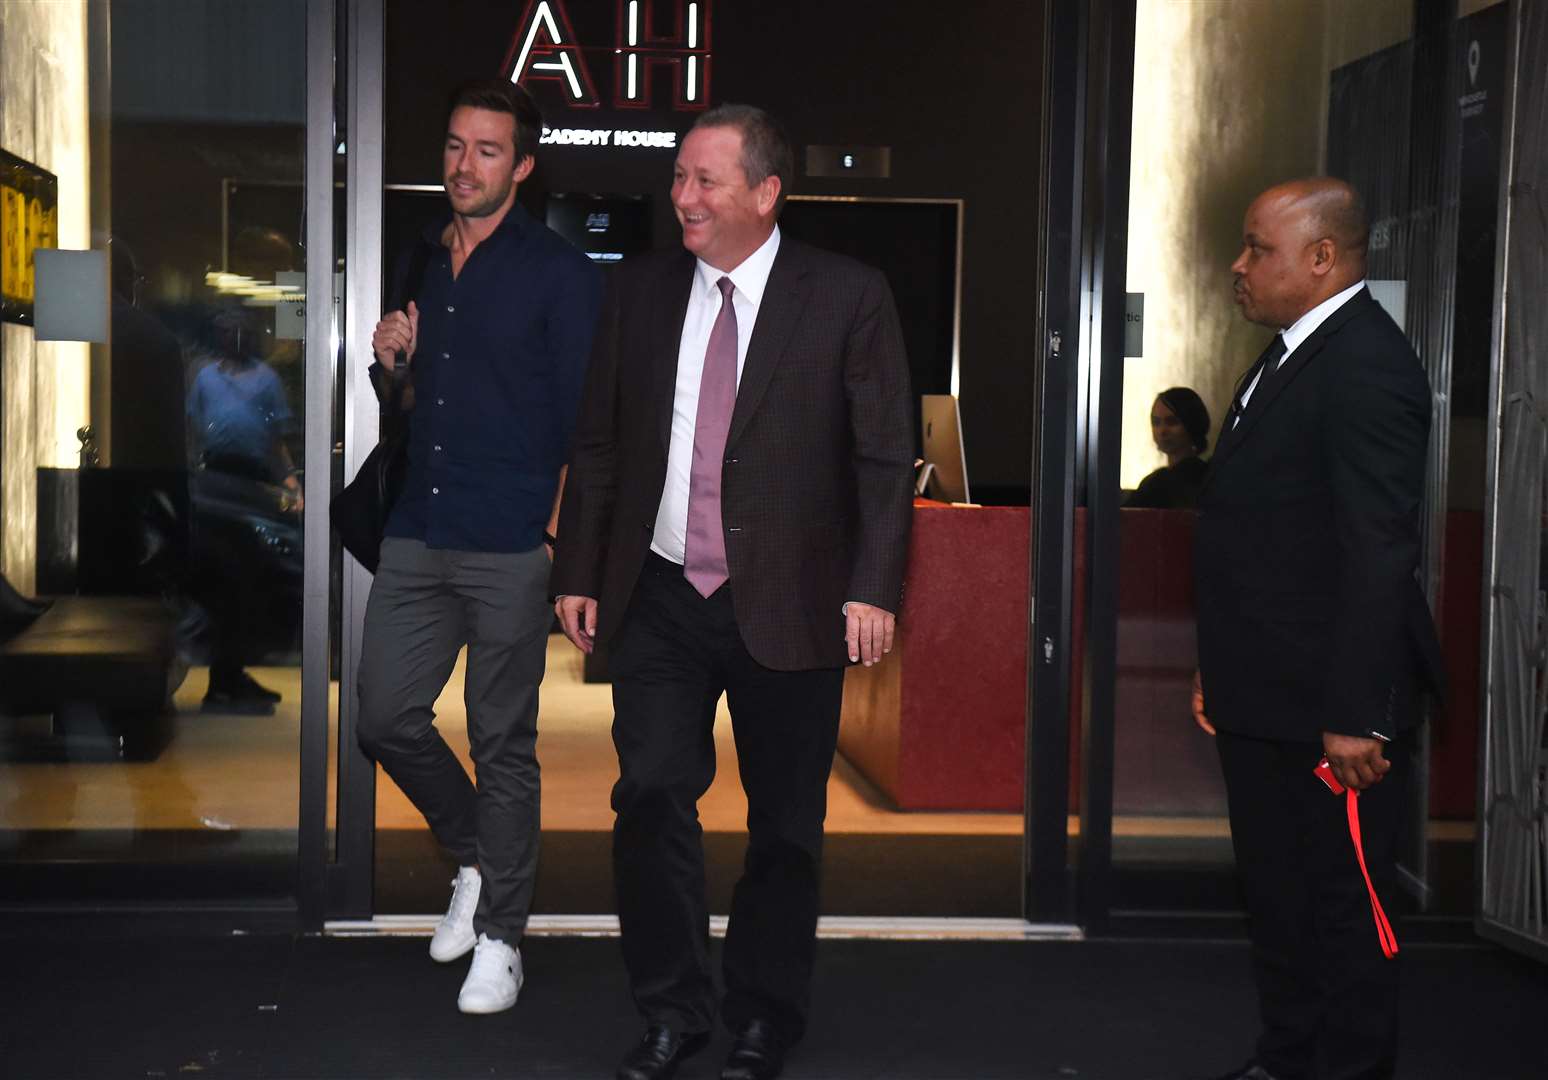 Mike Ashley (right) leaving the Sports Direct headquarters in London with chief executive officer Michael Murray (Kirsty O’Connor/PA)